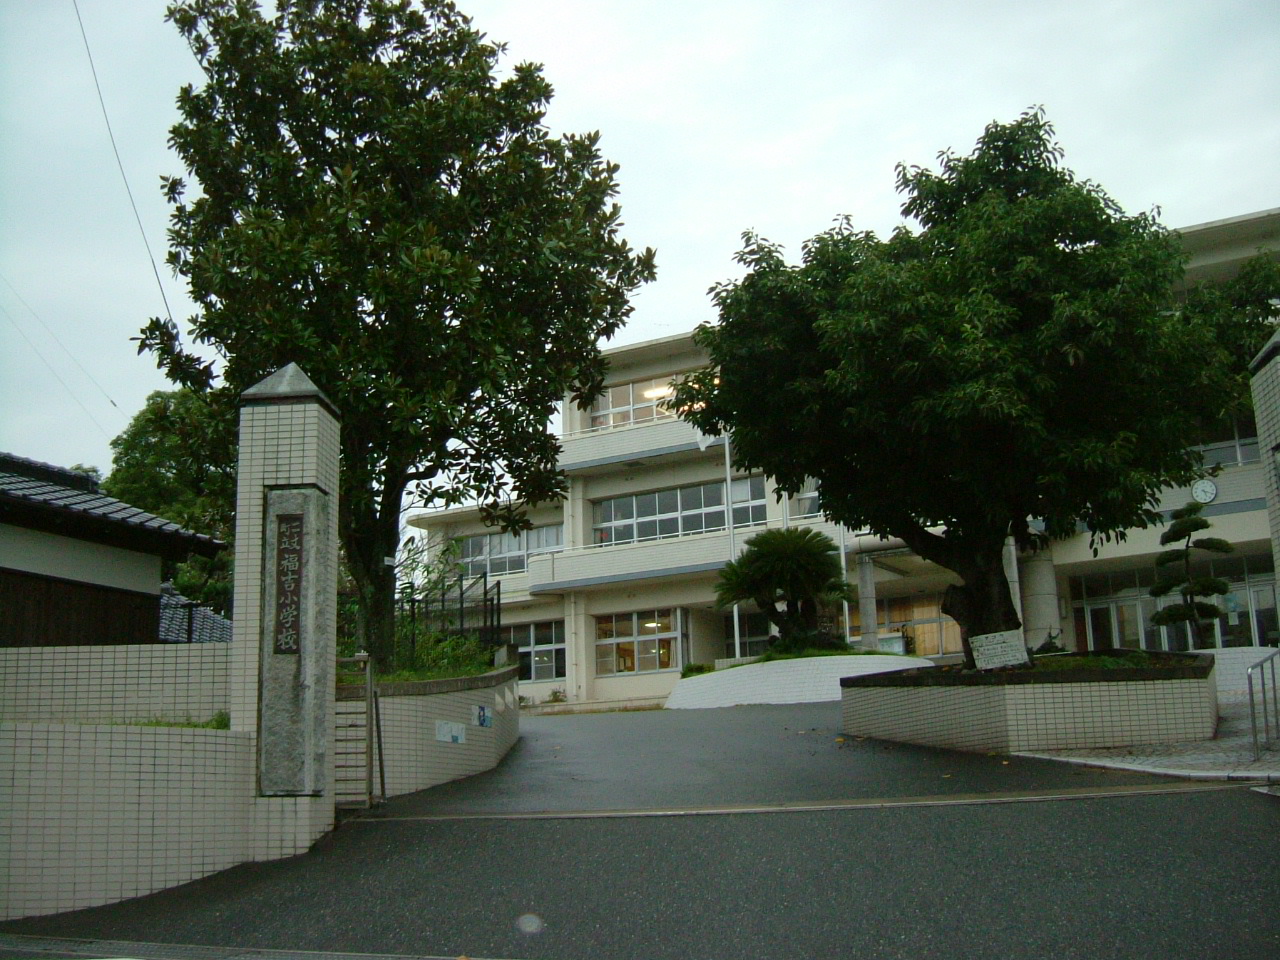 Primary school. Fukuyoshi until elementary school 500m 7-minute walk. School is also close to peace of mind